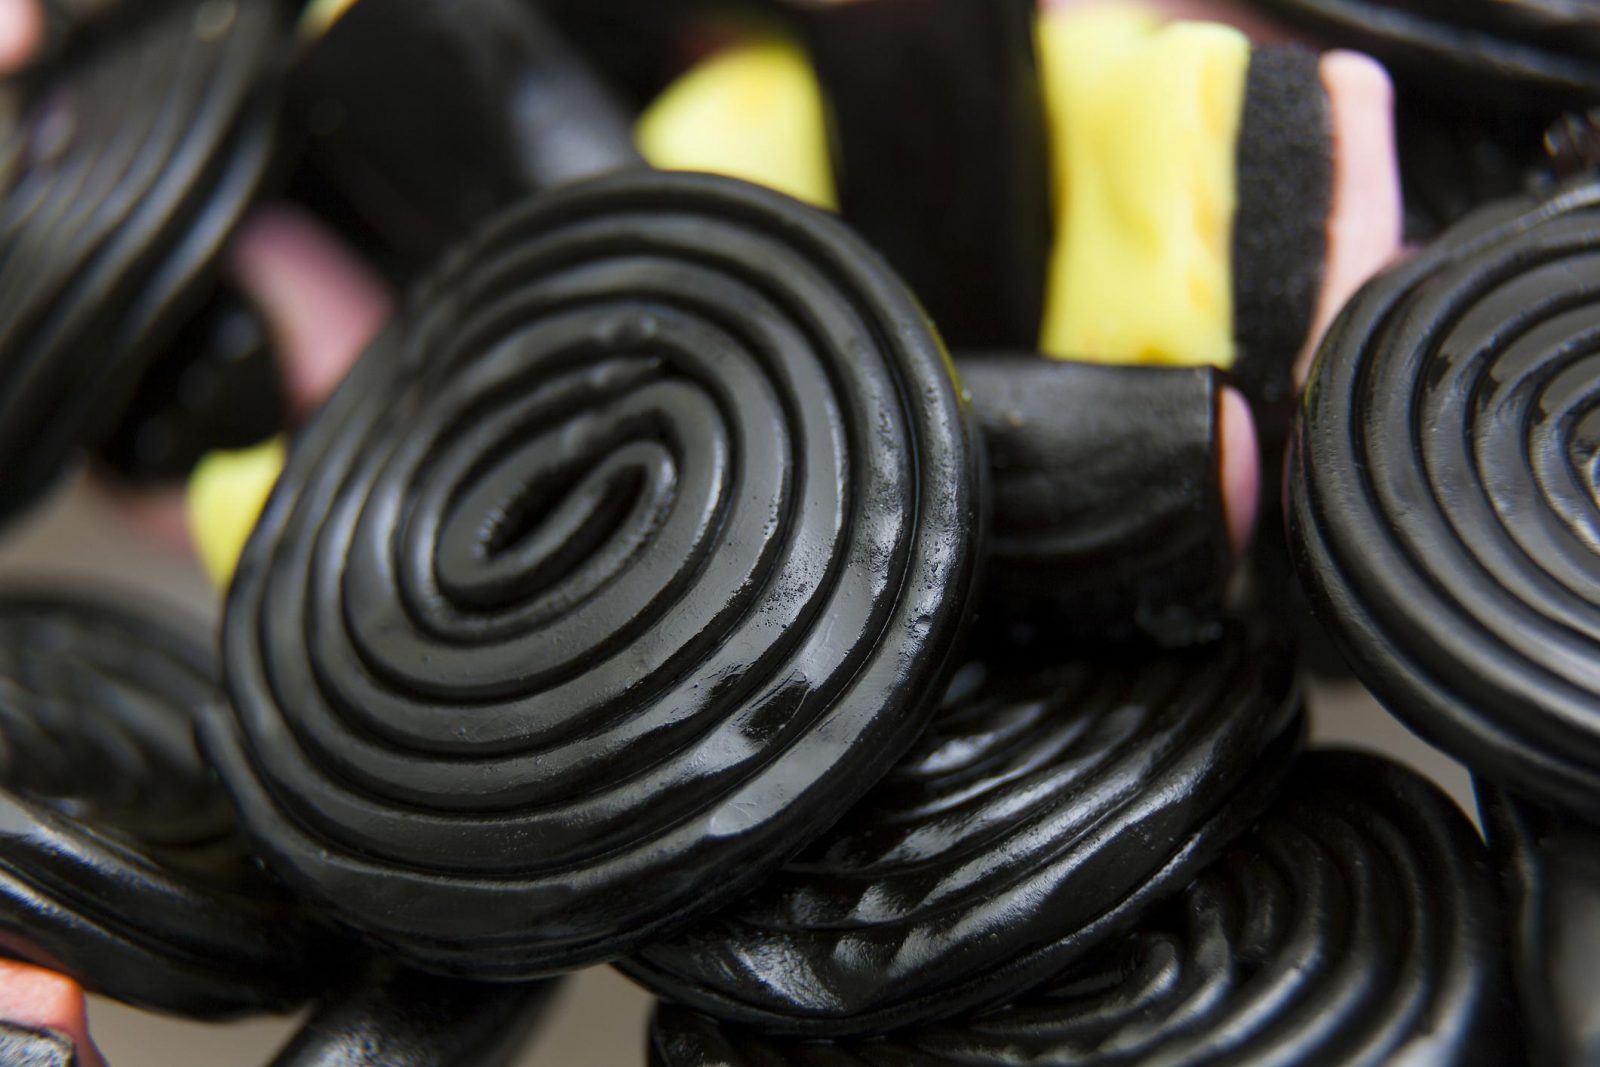 We Know Your Exact Age Based on How You Rate These Polarizing Foods Licorice